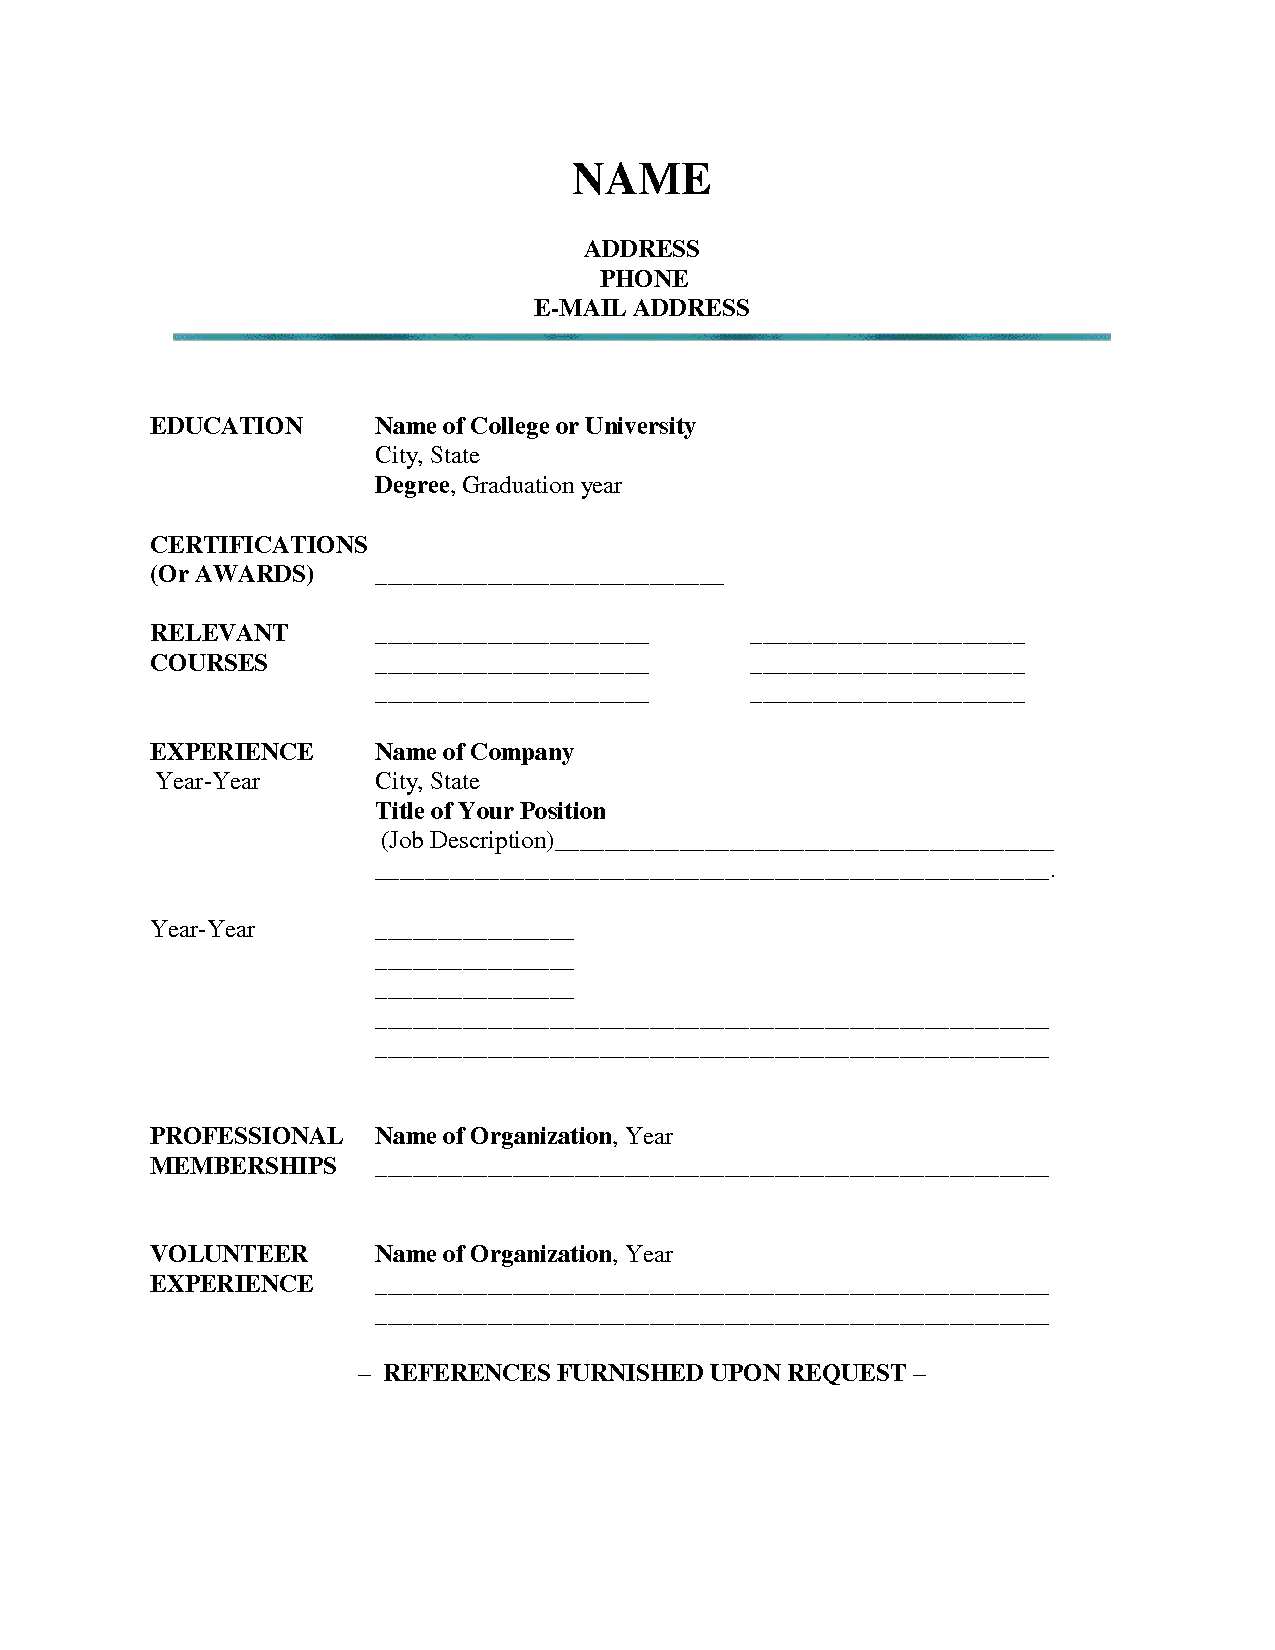 Resume Template For Microsoft Word Cover Letter Cover Letter Intended For Blank Resume Templates For Microsoft Word